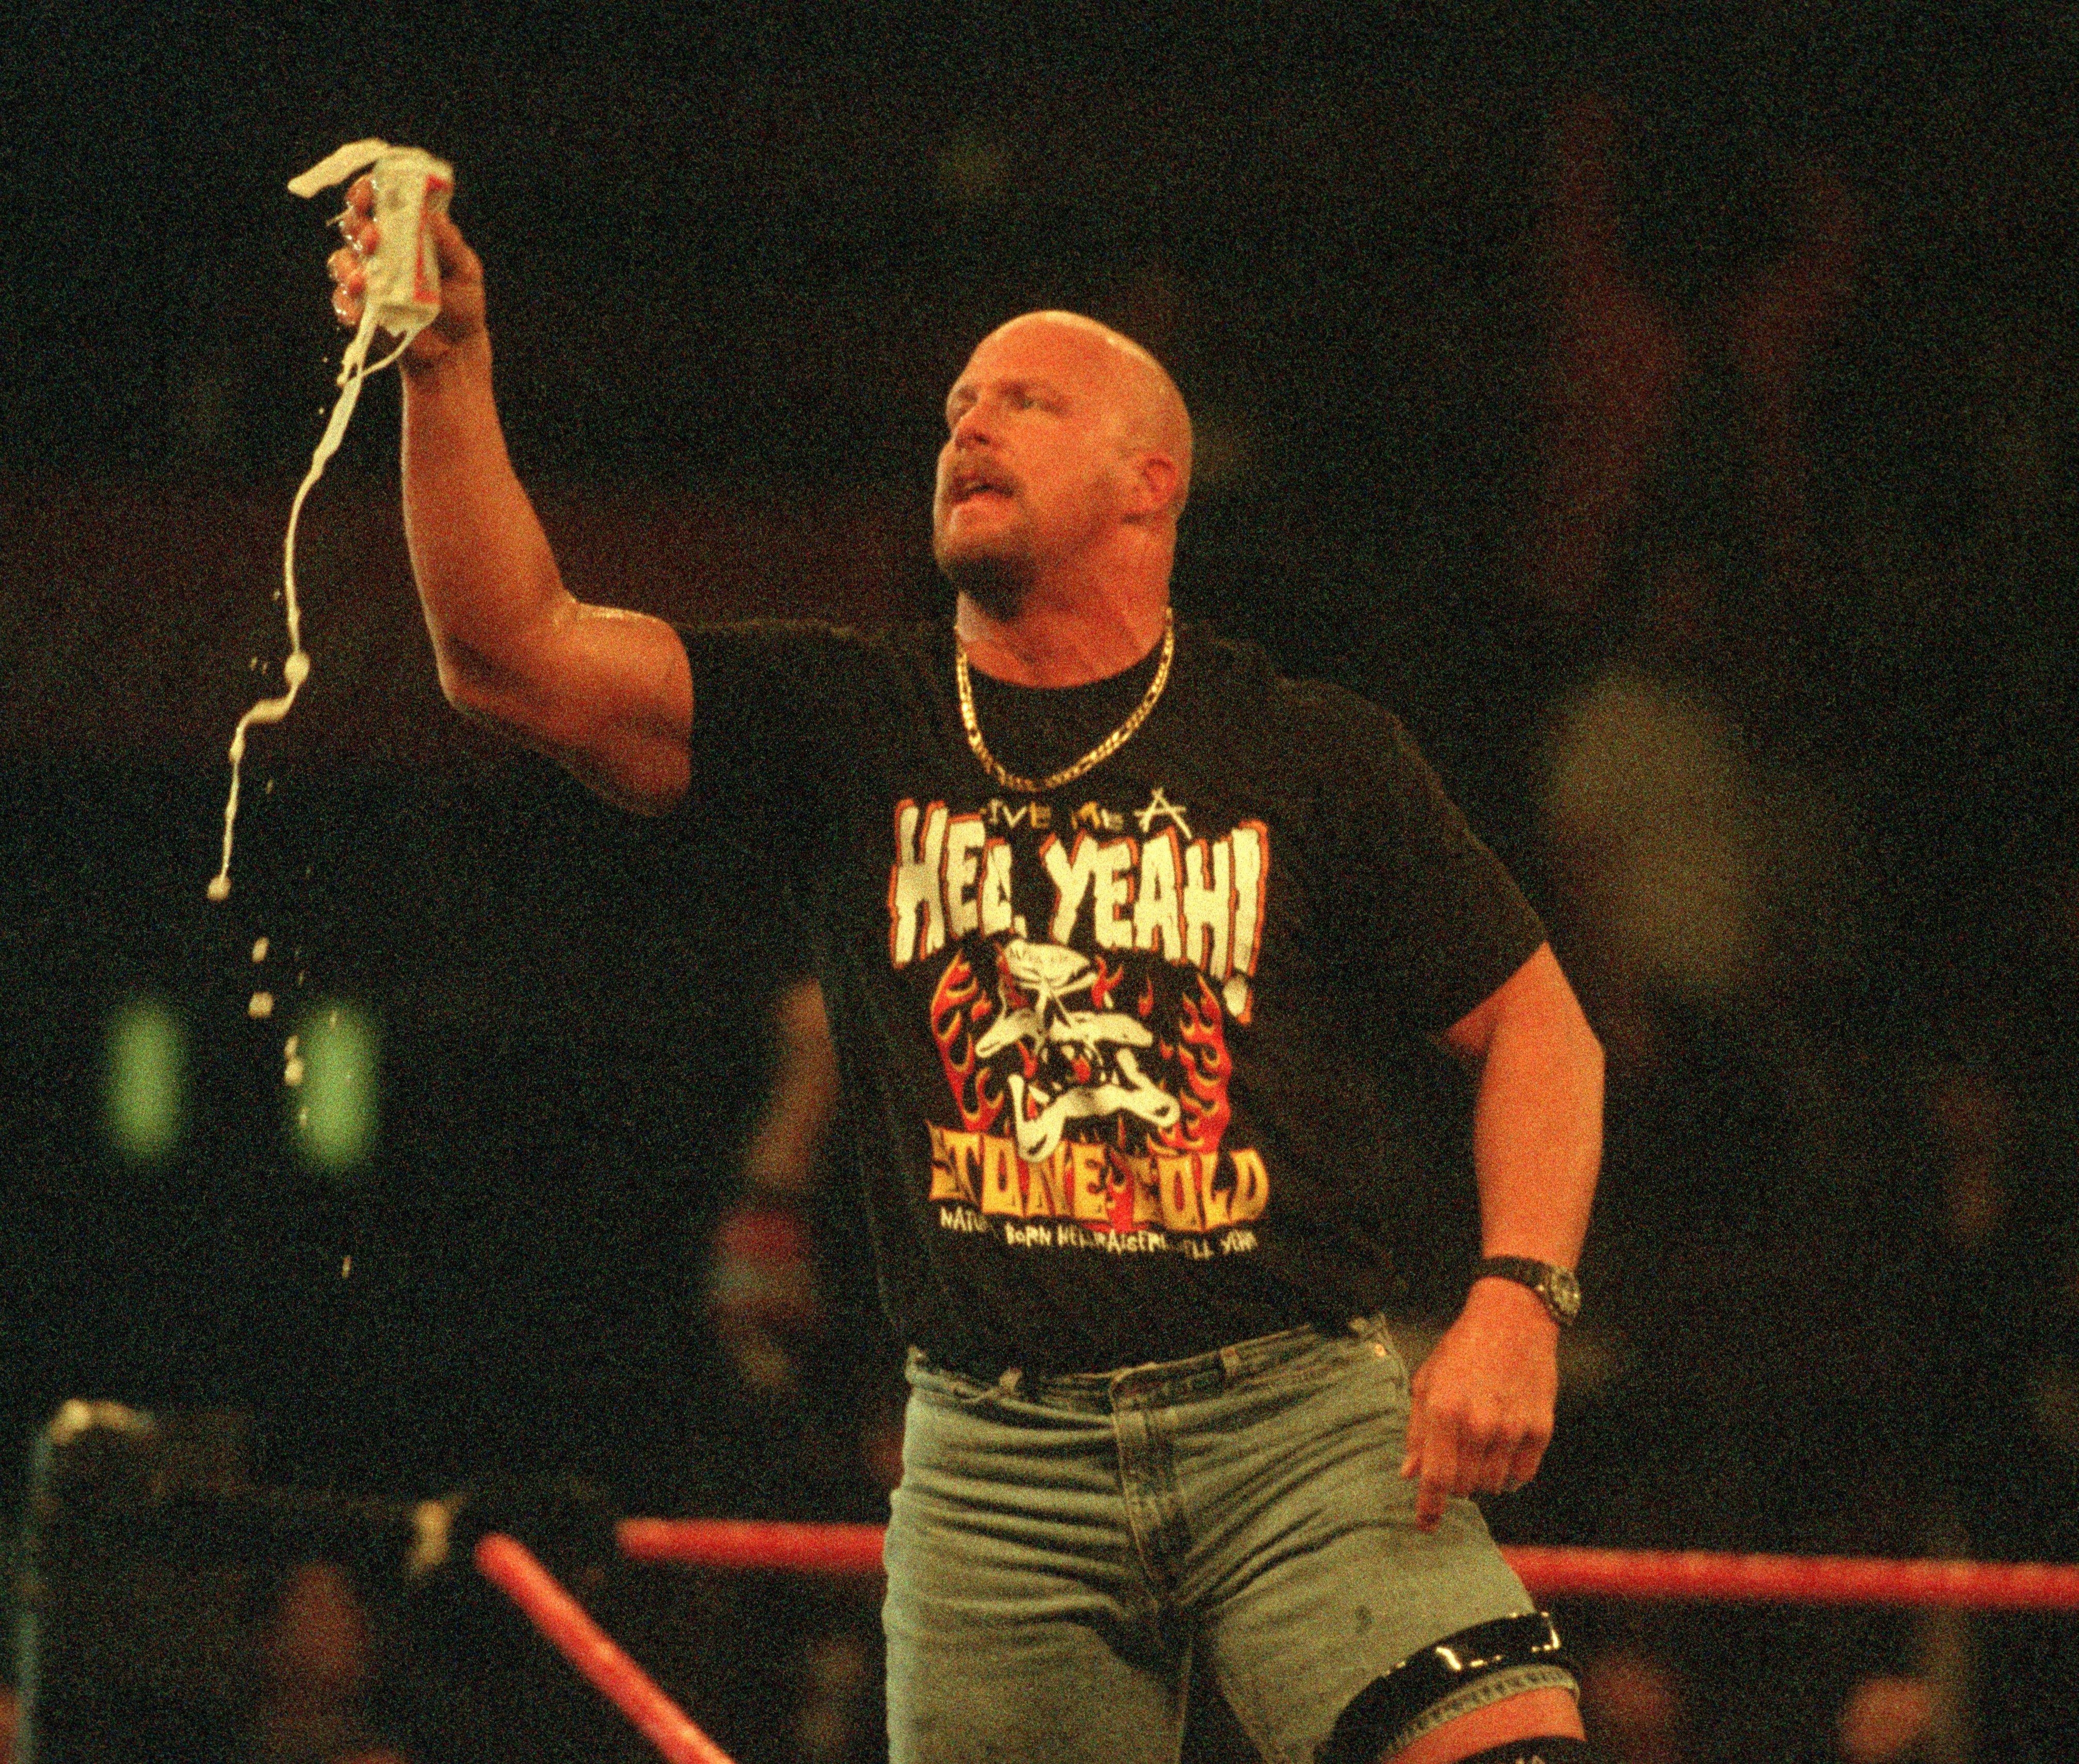 &quot;Stone Cold&quot; Steve Austin raises an overflowing beer to the crowd